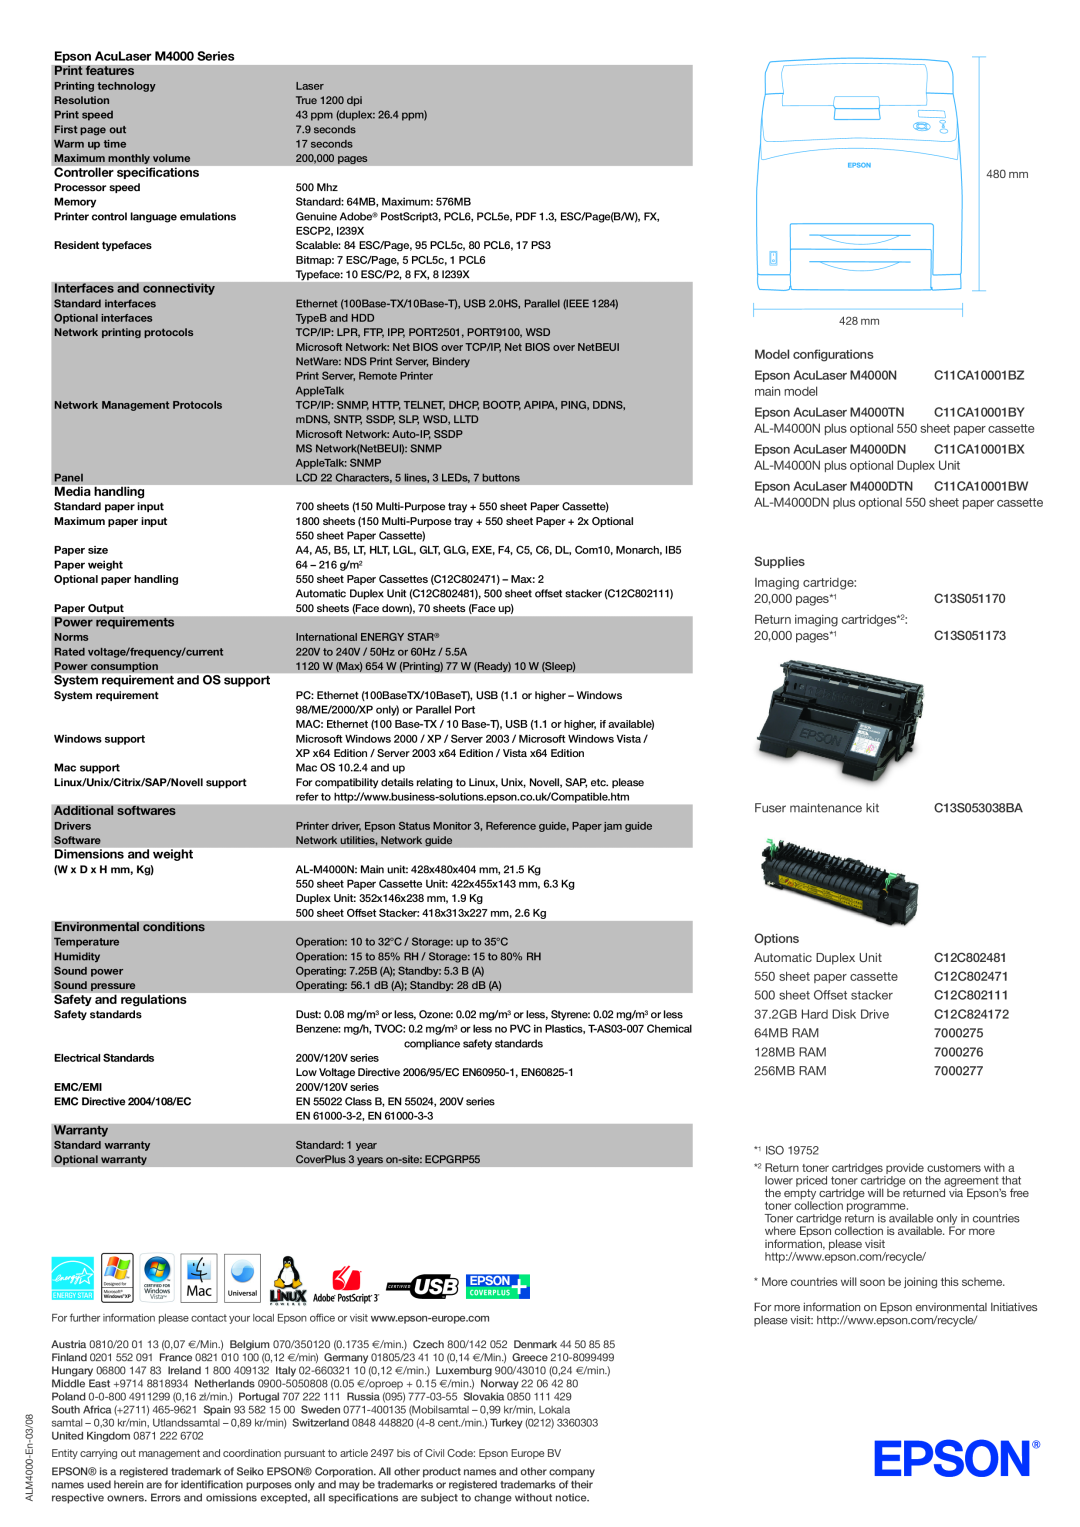 Epson manual Epson AcuLaser M4000 Series Print features 